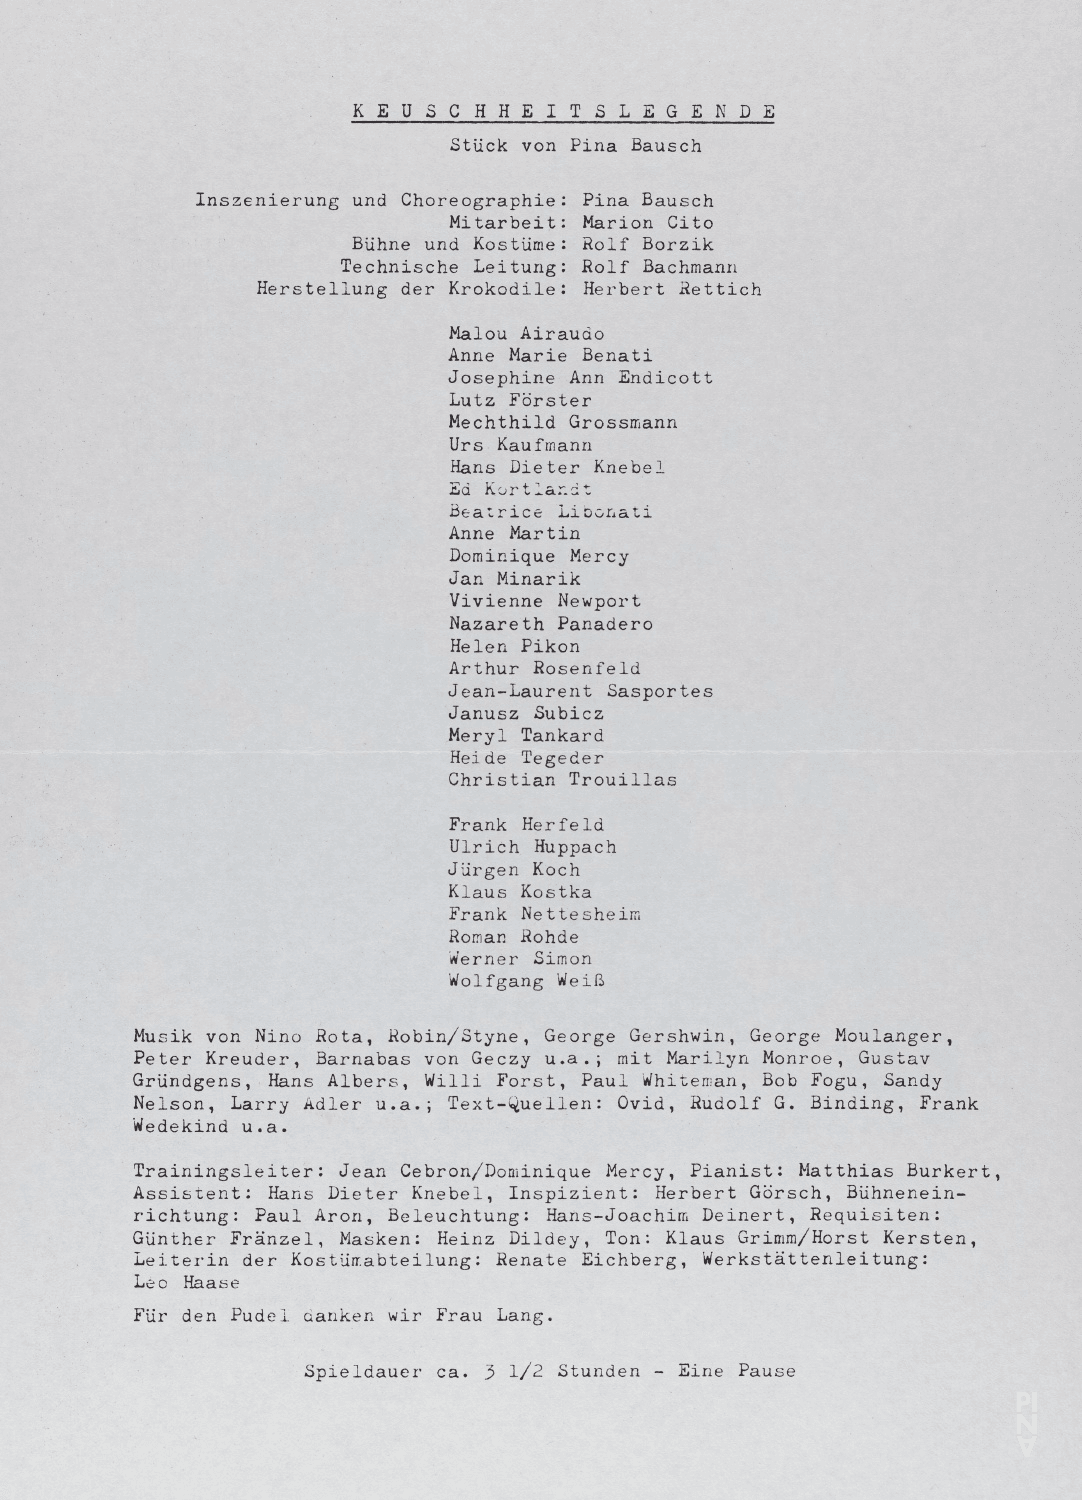 Evening leaflet for “Keuschheitslegende (Legend of Chastity)” by Pina Bausch with Tanztheater Wuppertal in in Wuppertal, Dec. 13, 1979